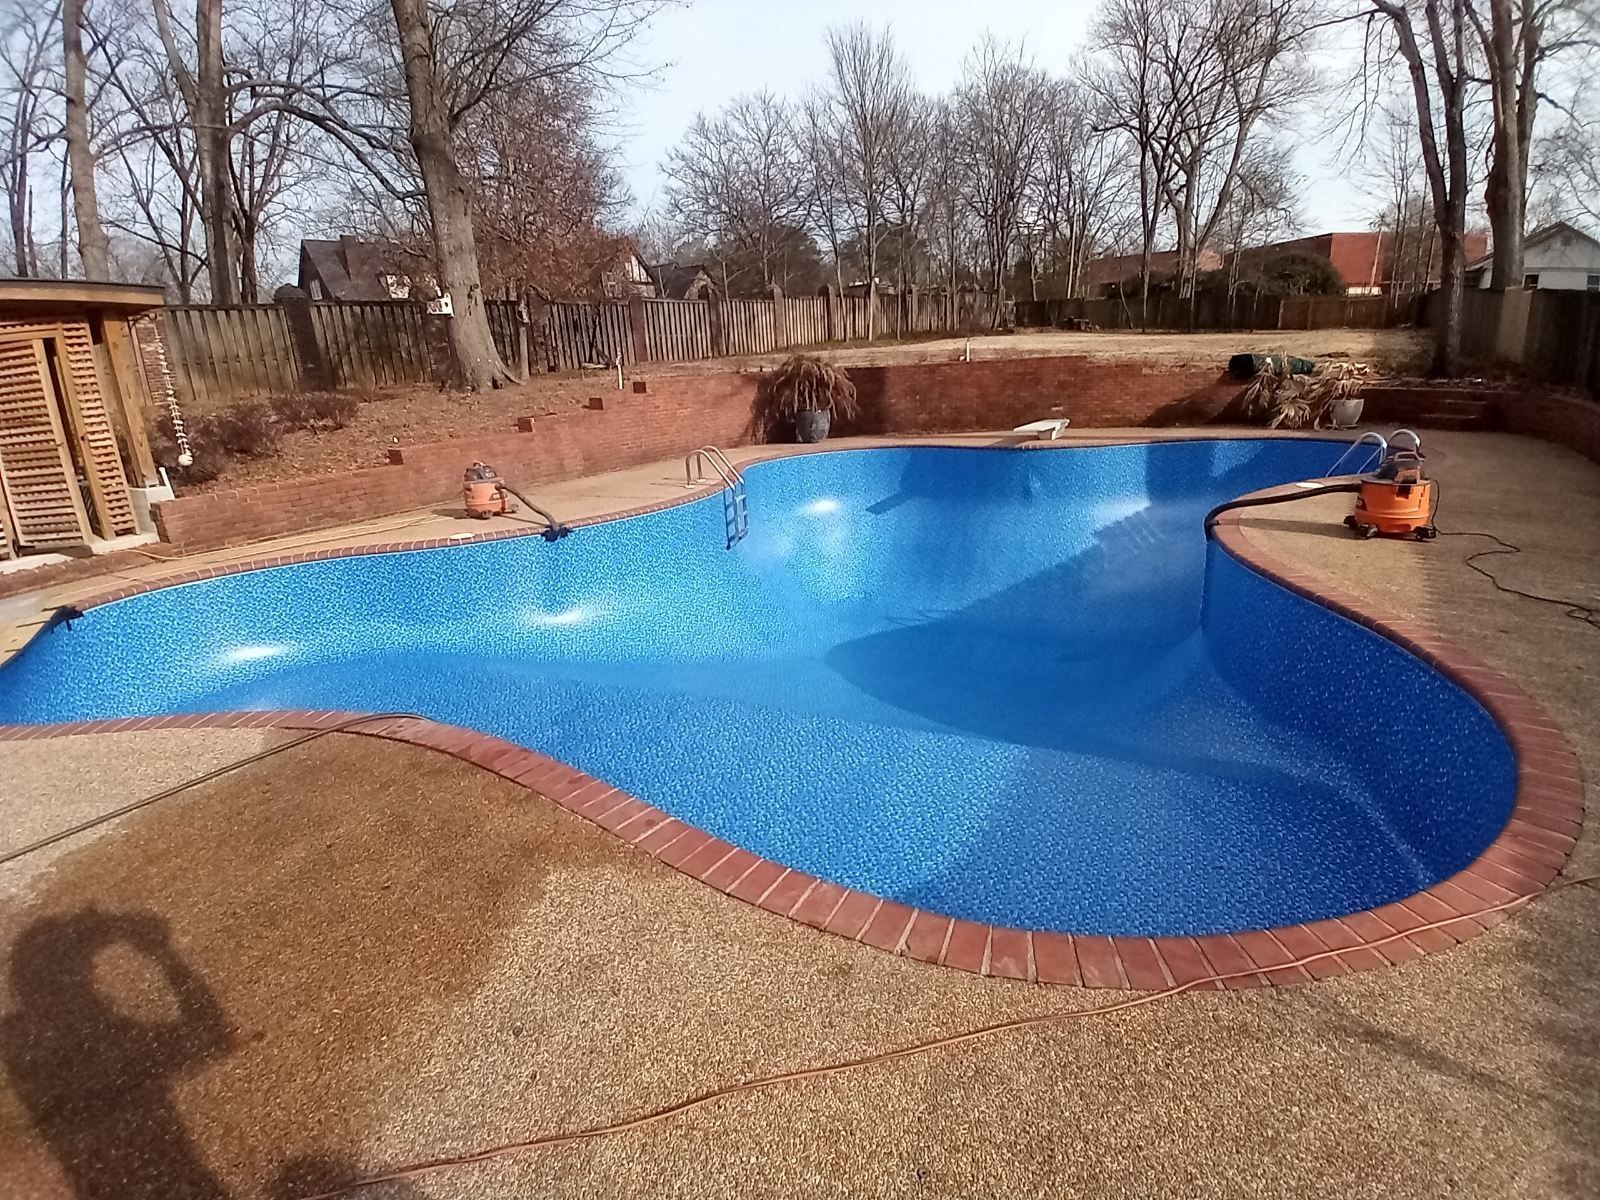 A large blue swimming pool is being built in a backyard.